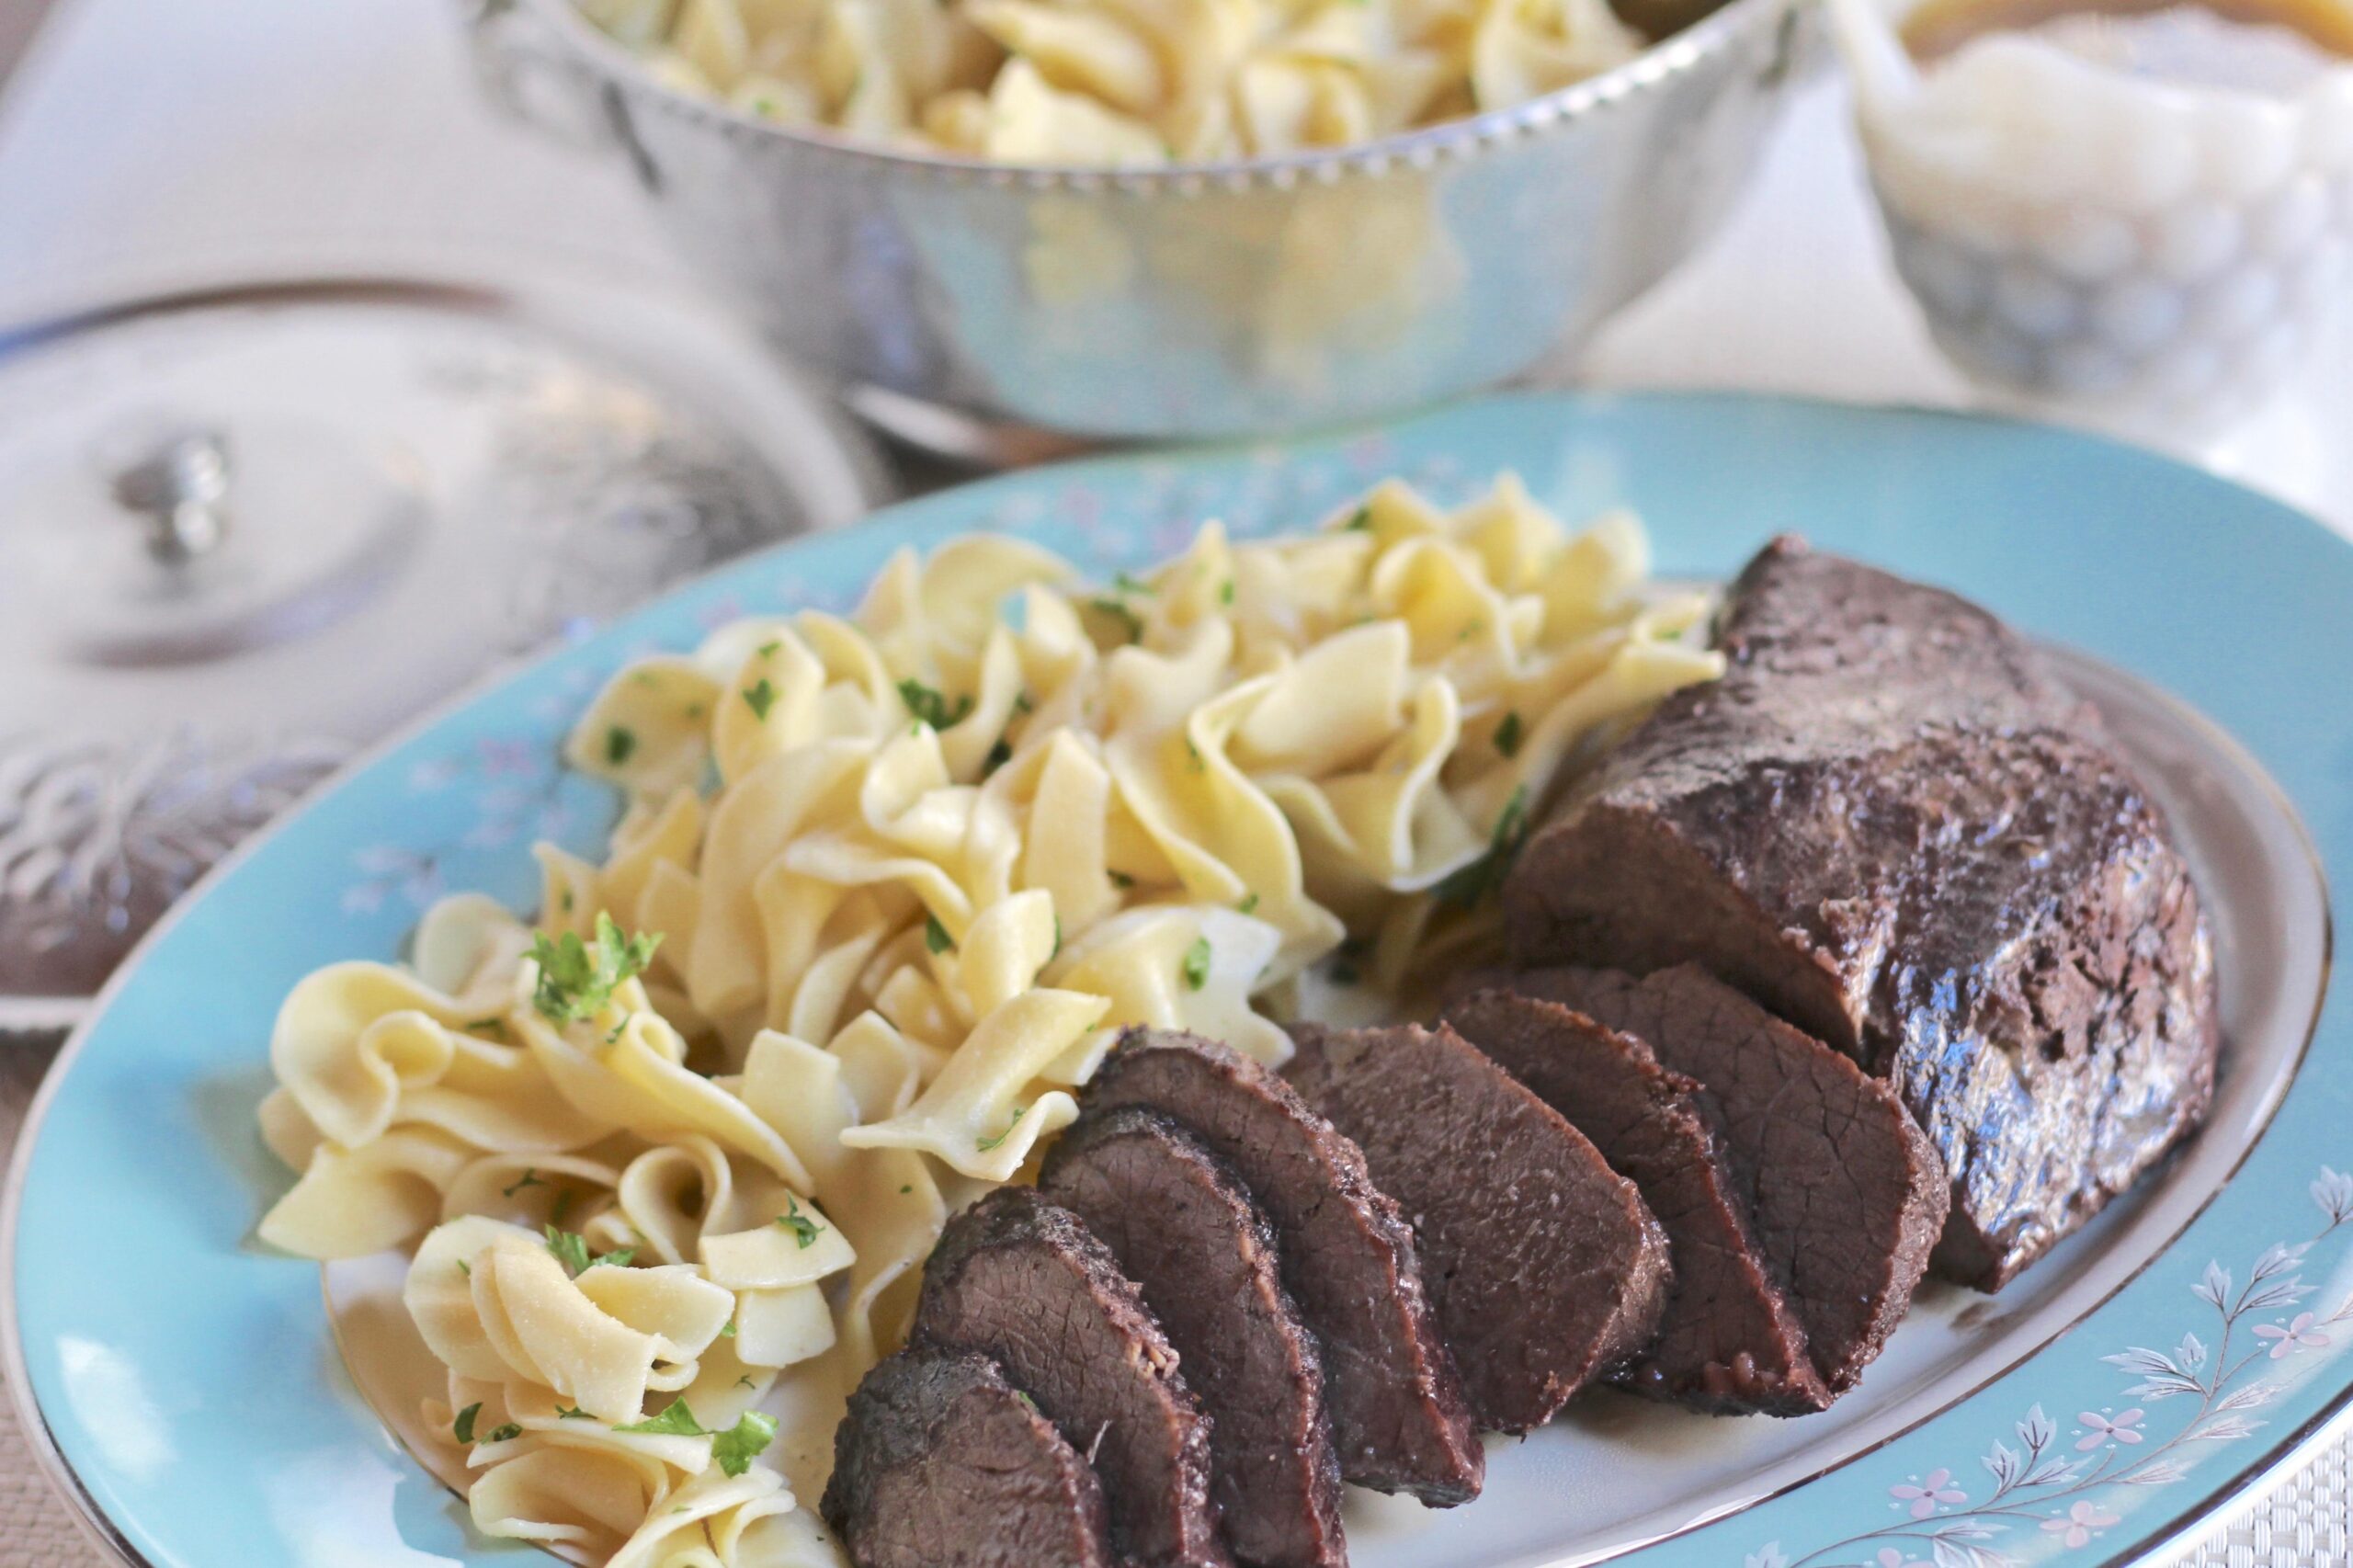  Let your taste buds savor the tender beef in a delicious Pinot Noir sauce.